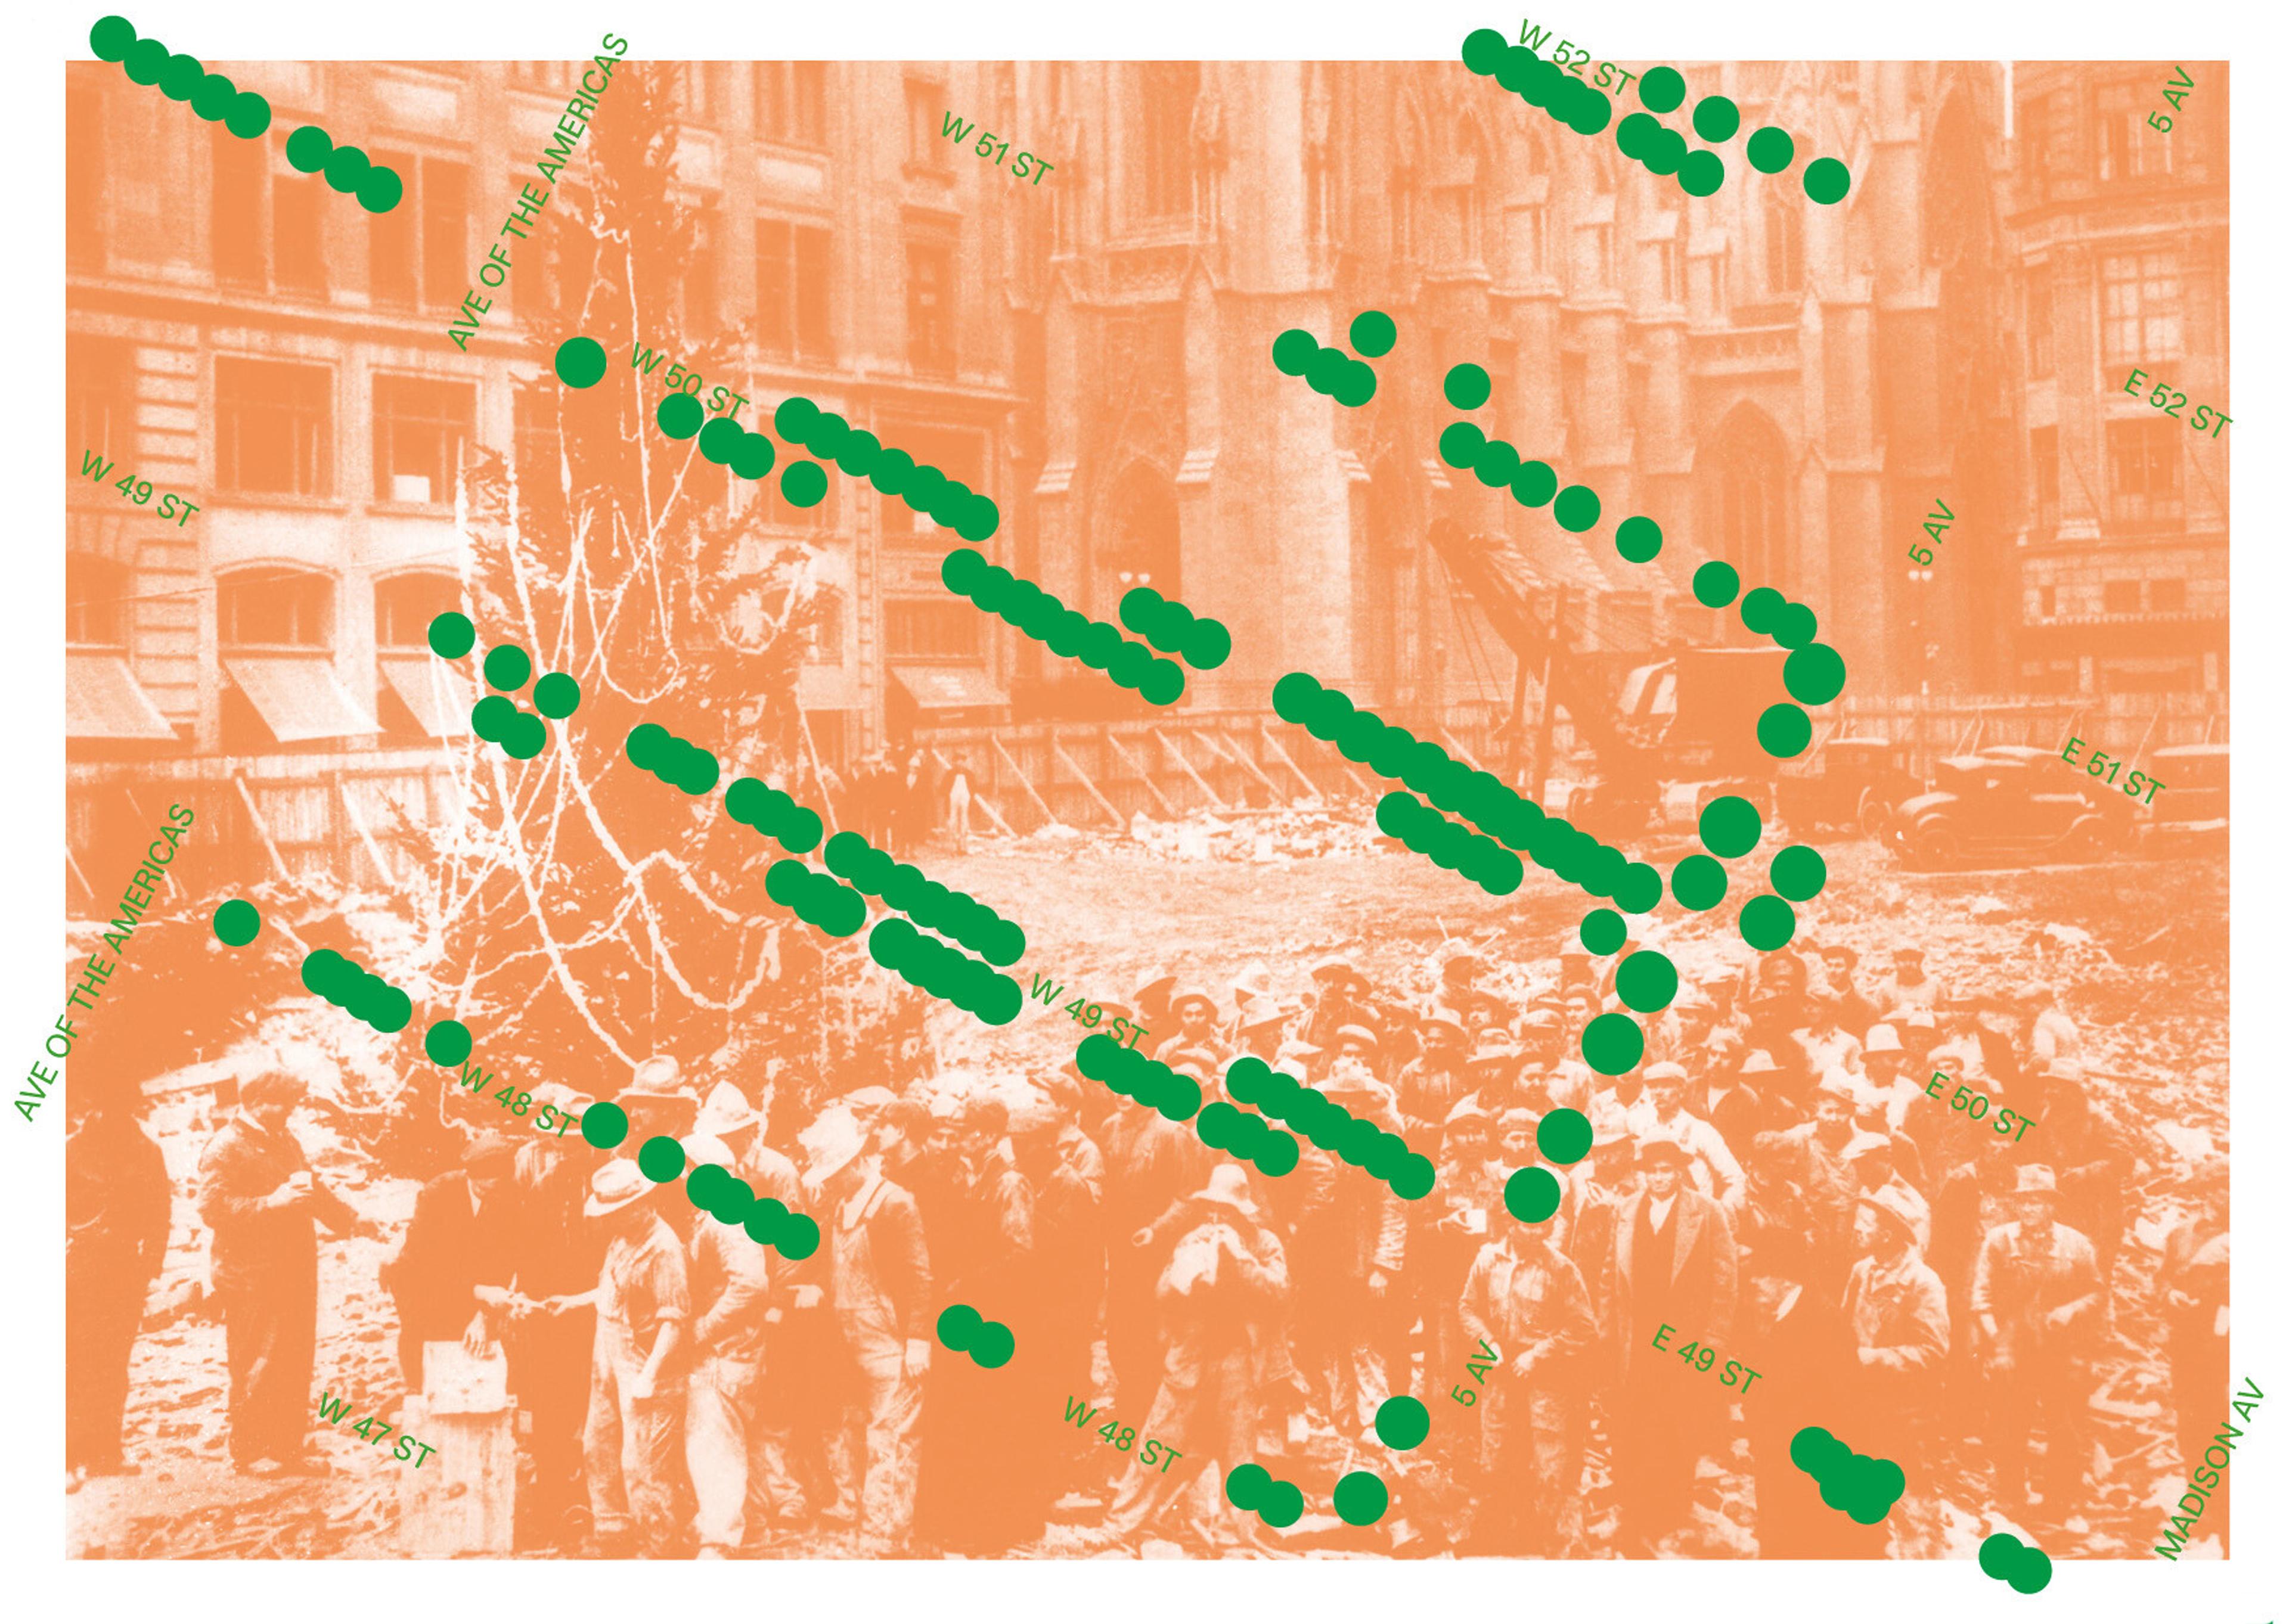 Flyer for Offsetted, midtown Manhattan street map with tree locations overlaid on a salmon-coloured photograph of a crowd of people around a decoration tree.